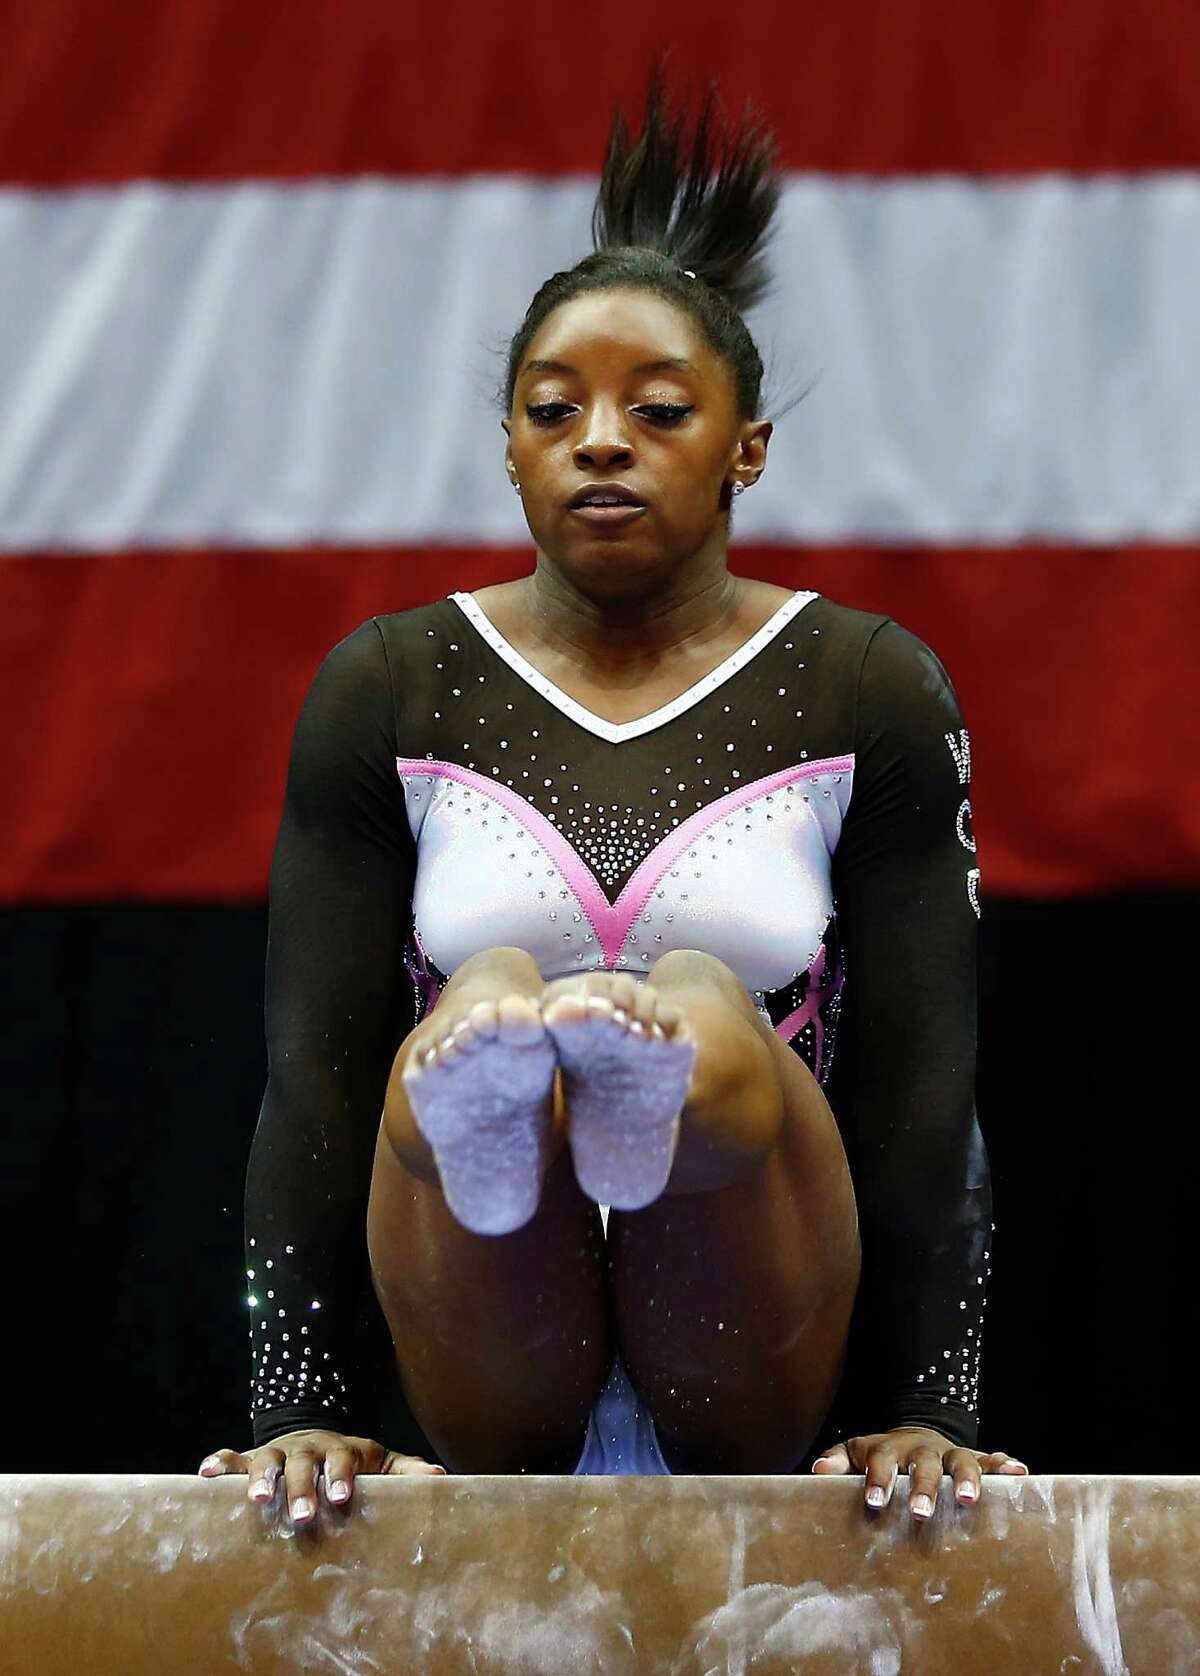 PITTSBURGH, PA - AUGUST 21: Simone Biles competes on the balance beam section of the senior women preliminaries during the 2014 P&G Gymnastics Championships at Consol Energy Center on August 21, 2014 in Pittsburgh, Pennsylvania.